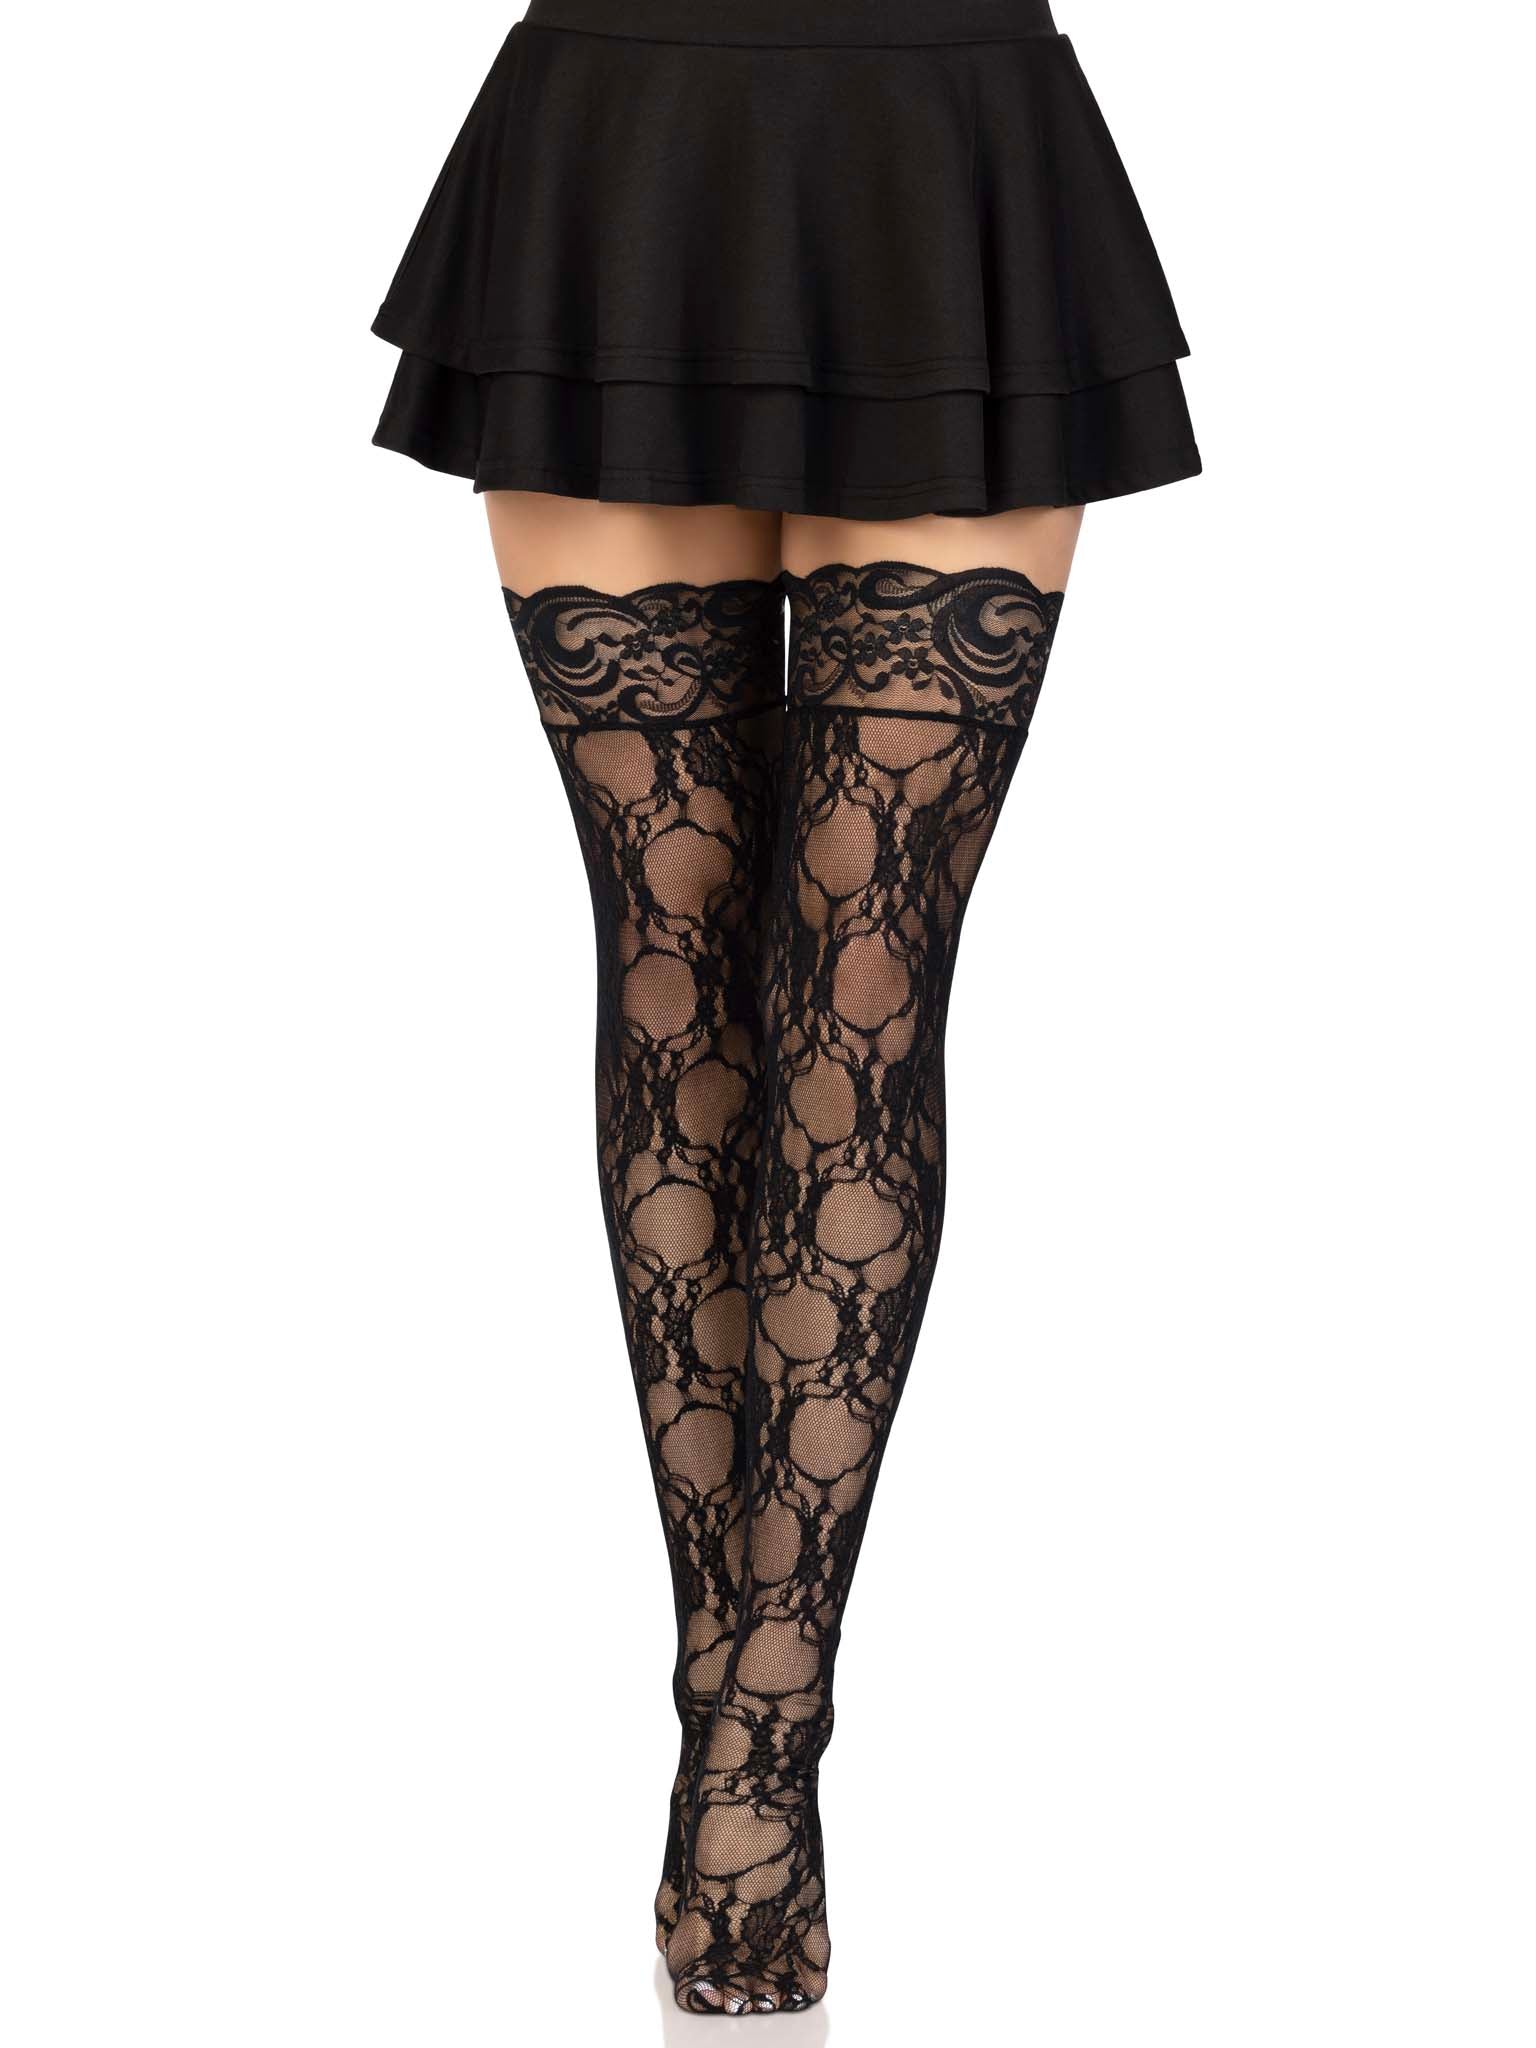 Stay Up Floral Lace Thigh Highs